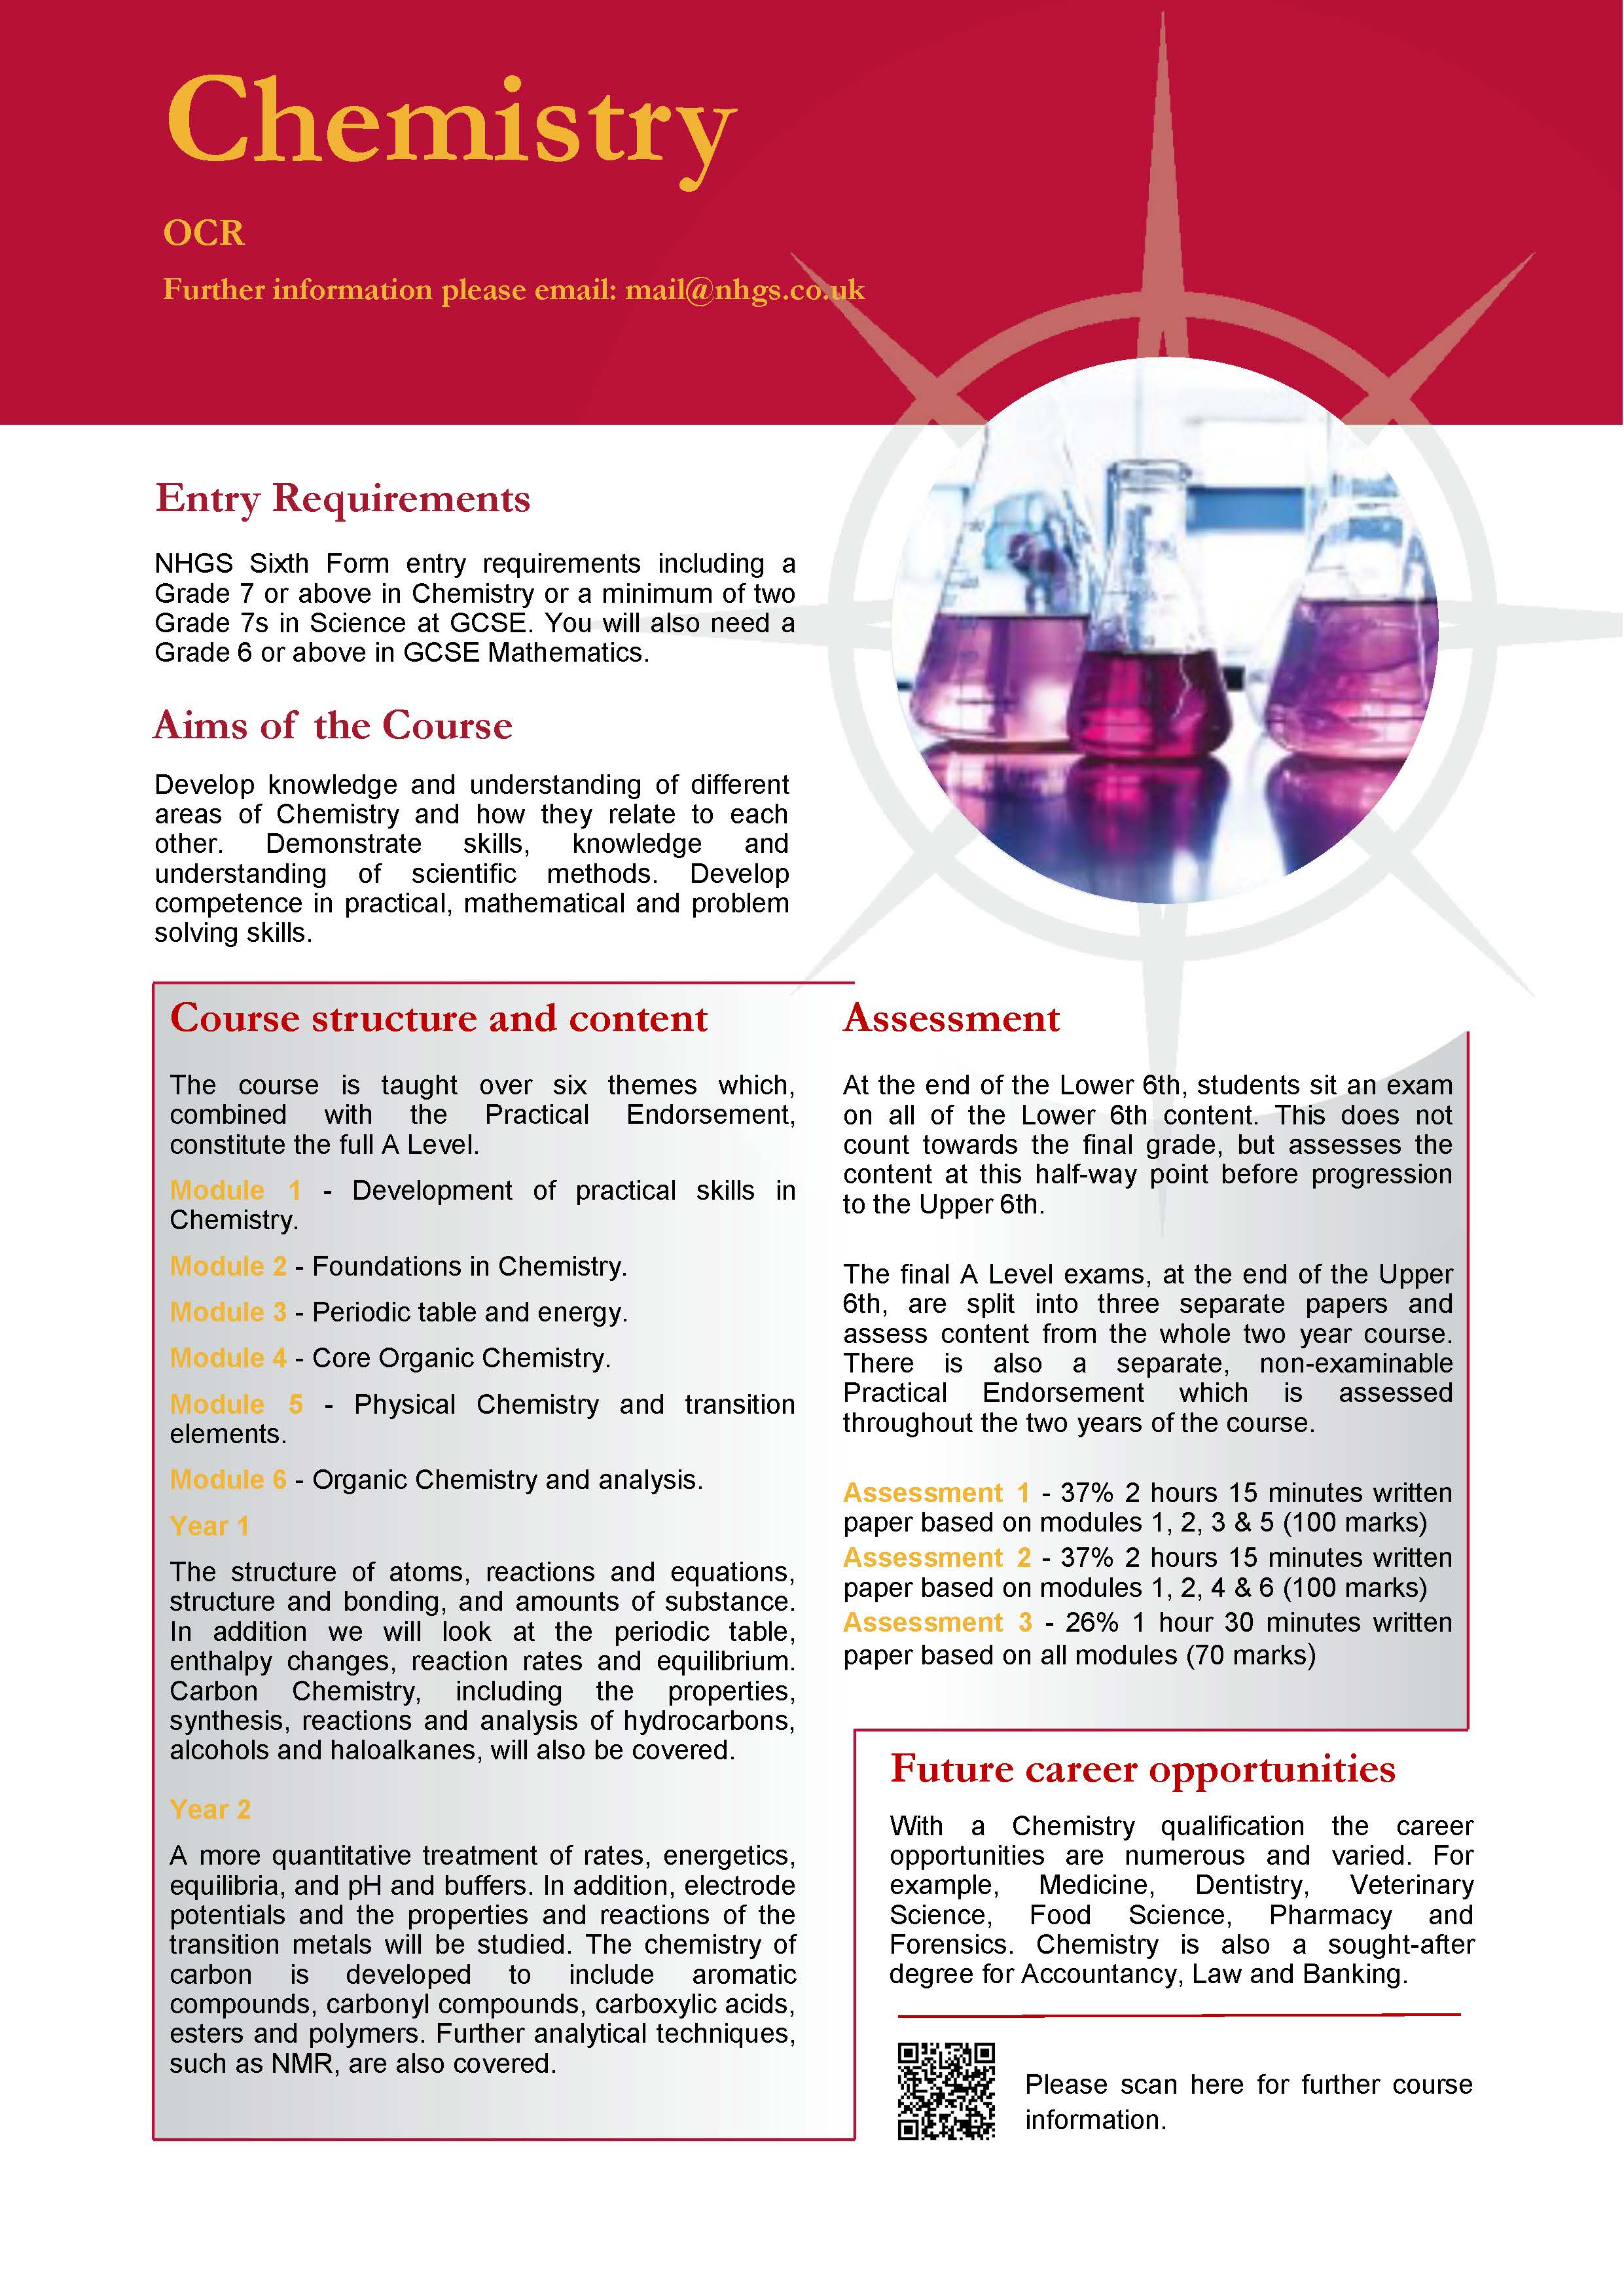 Chemistry A Level Course Flyer, NHGS Sixth Form